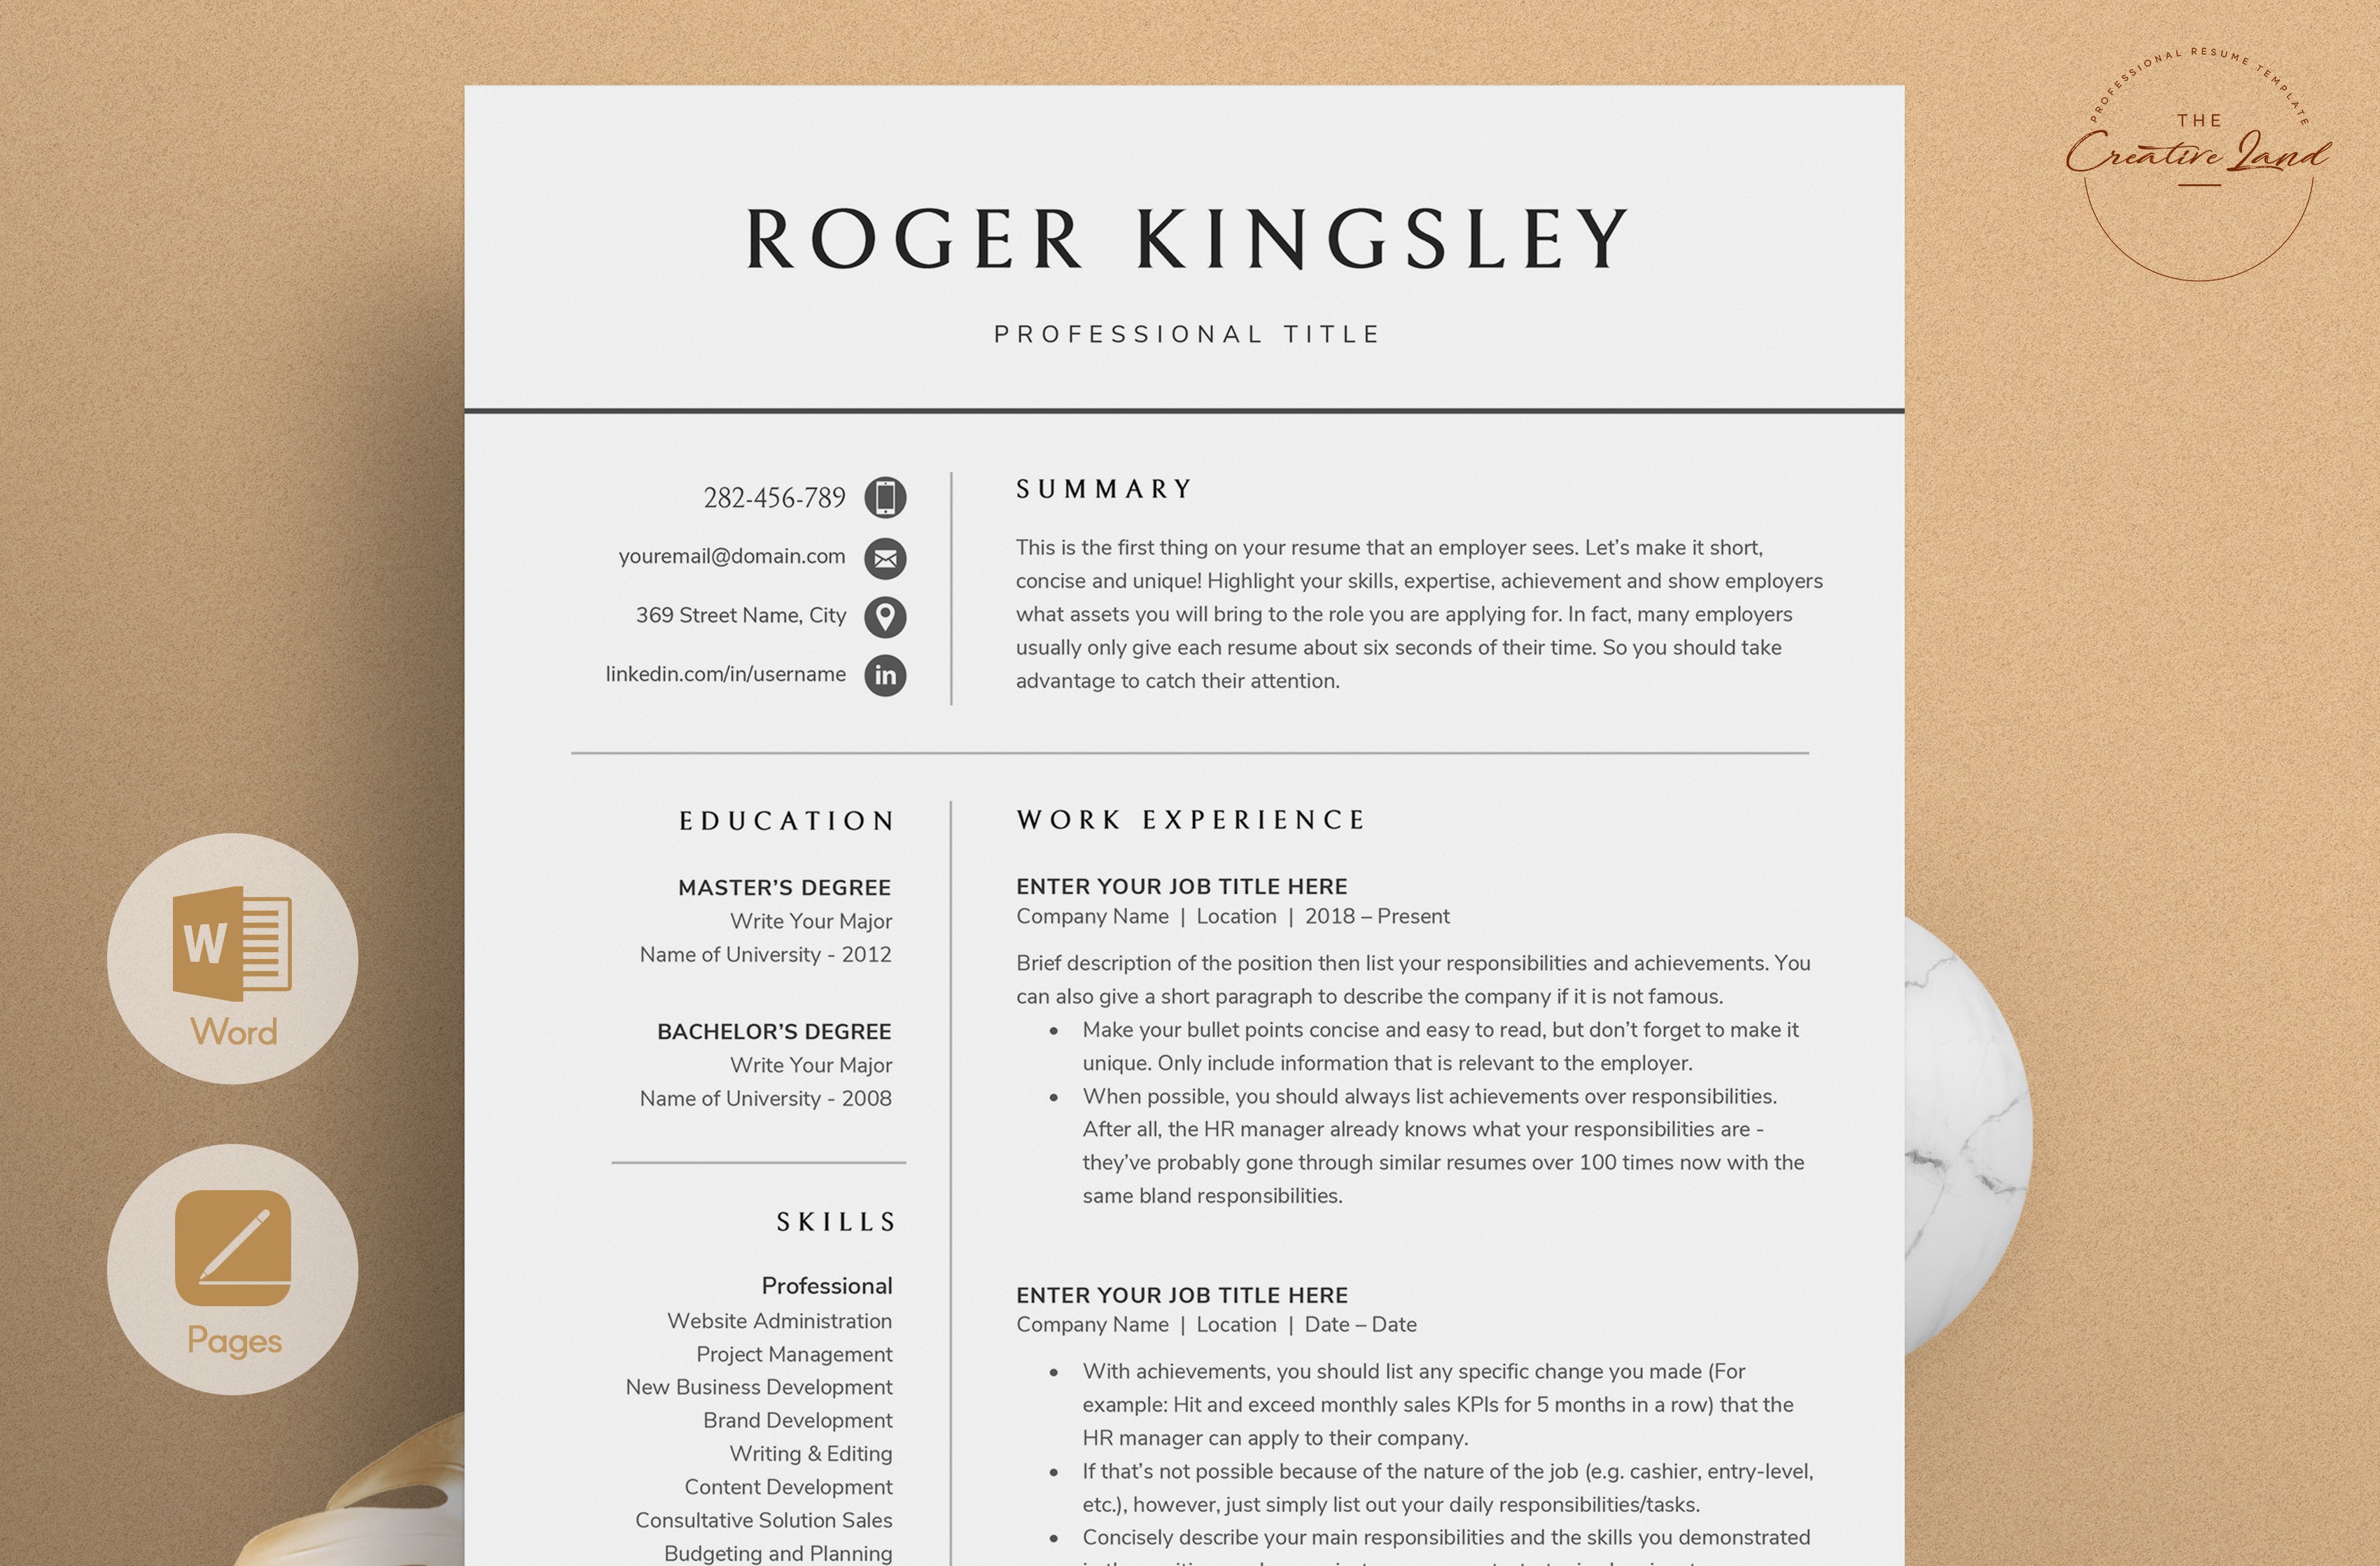 Resume/CV - The Roger cover image.